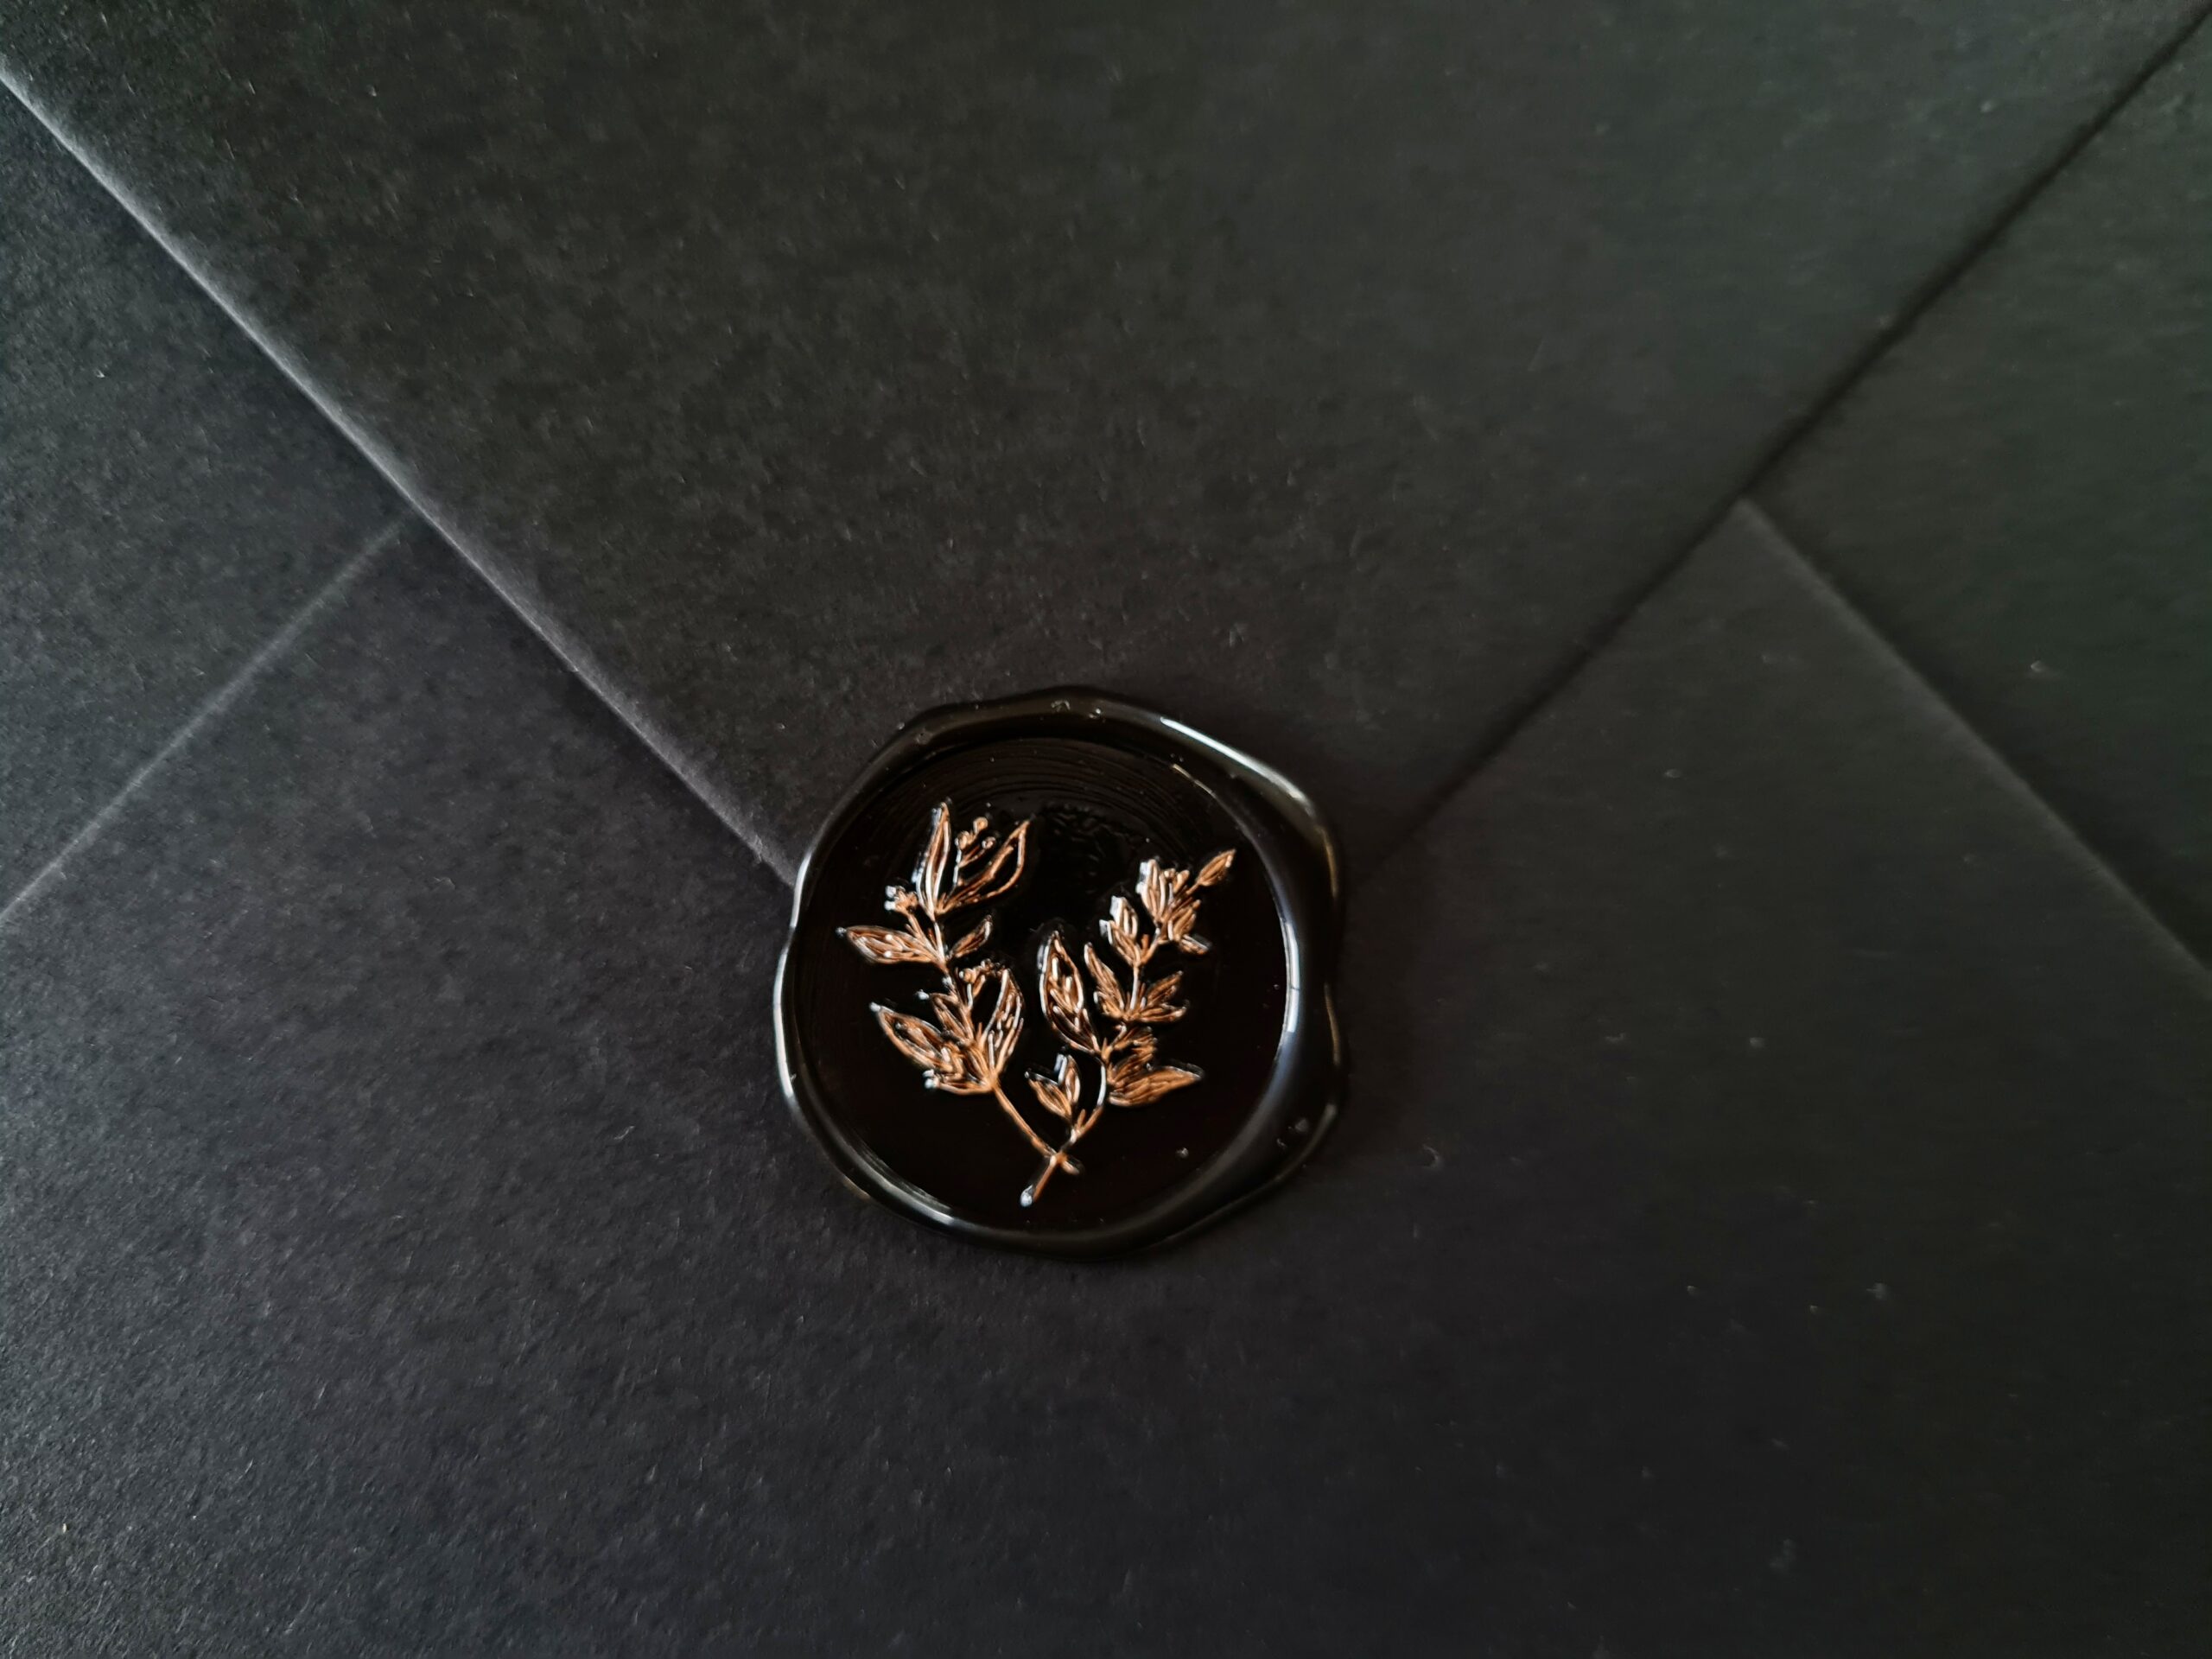 A black envelope with a black wax seal on the flap featuring bronze hand-painted leaf detailing.